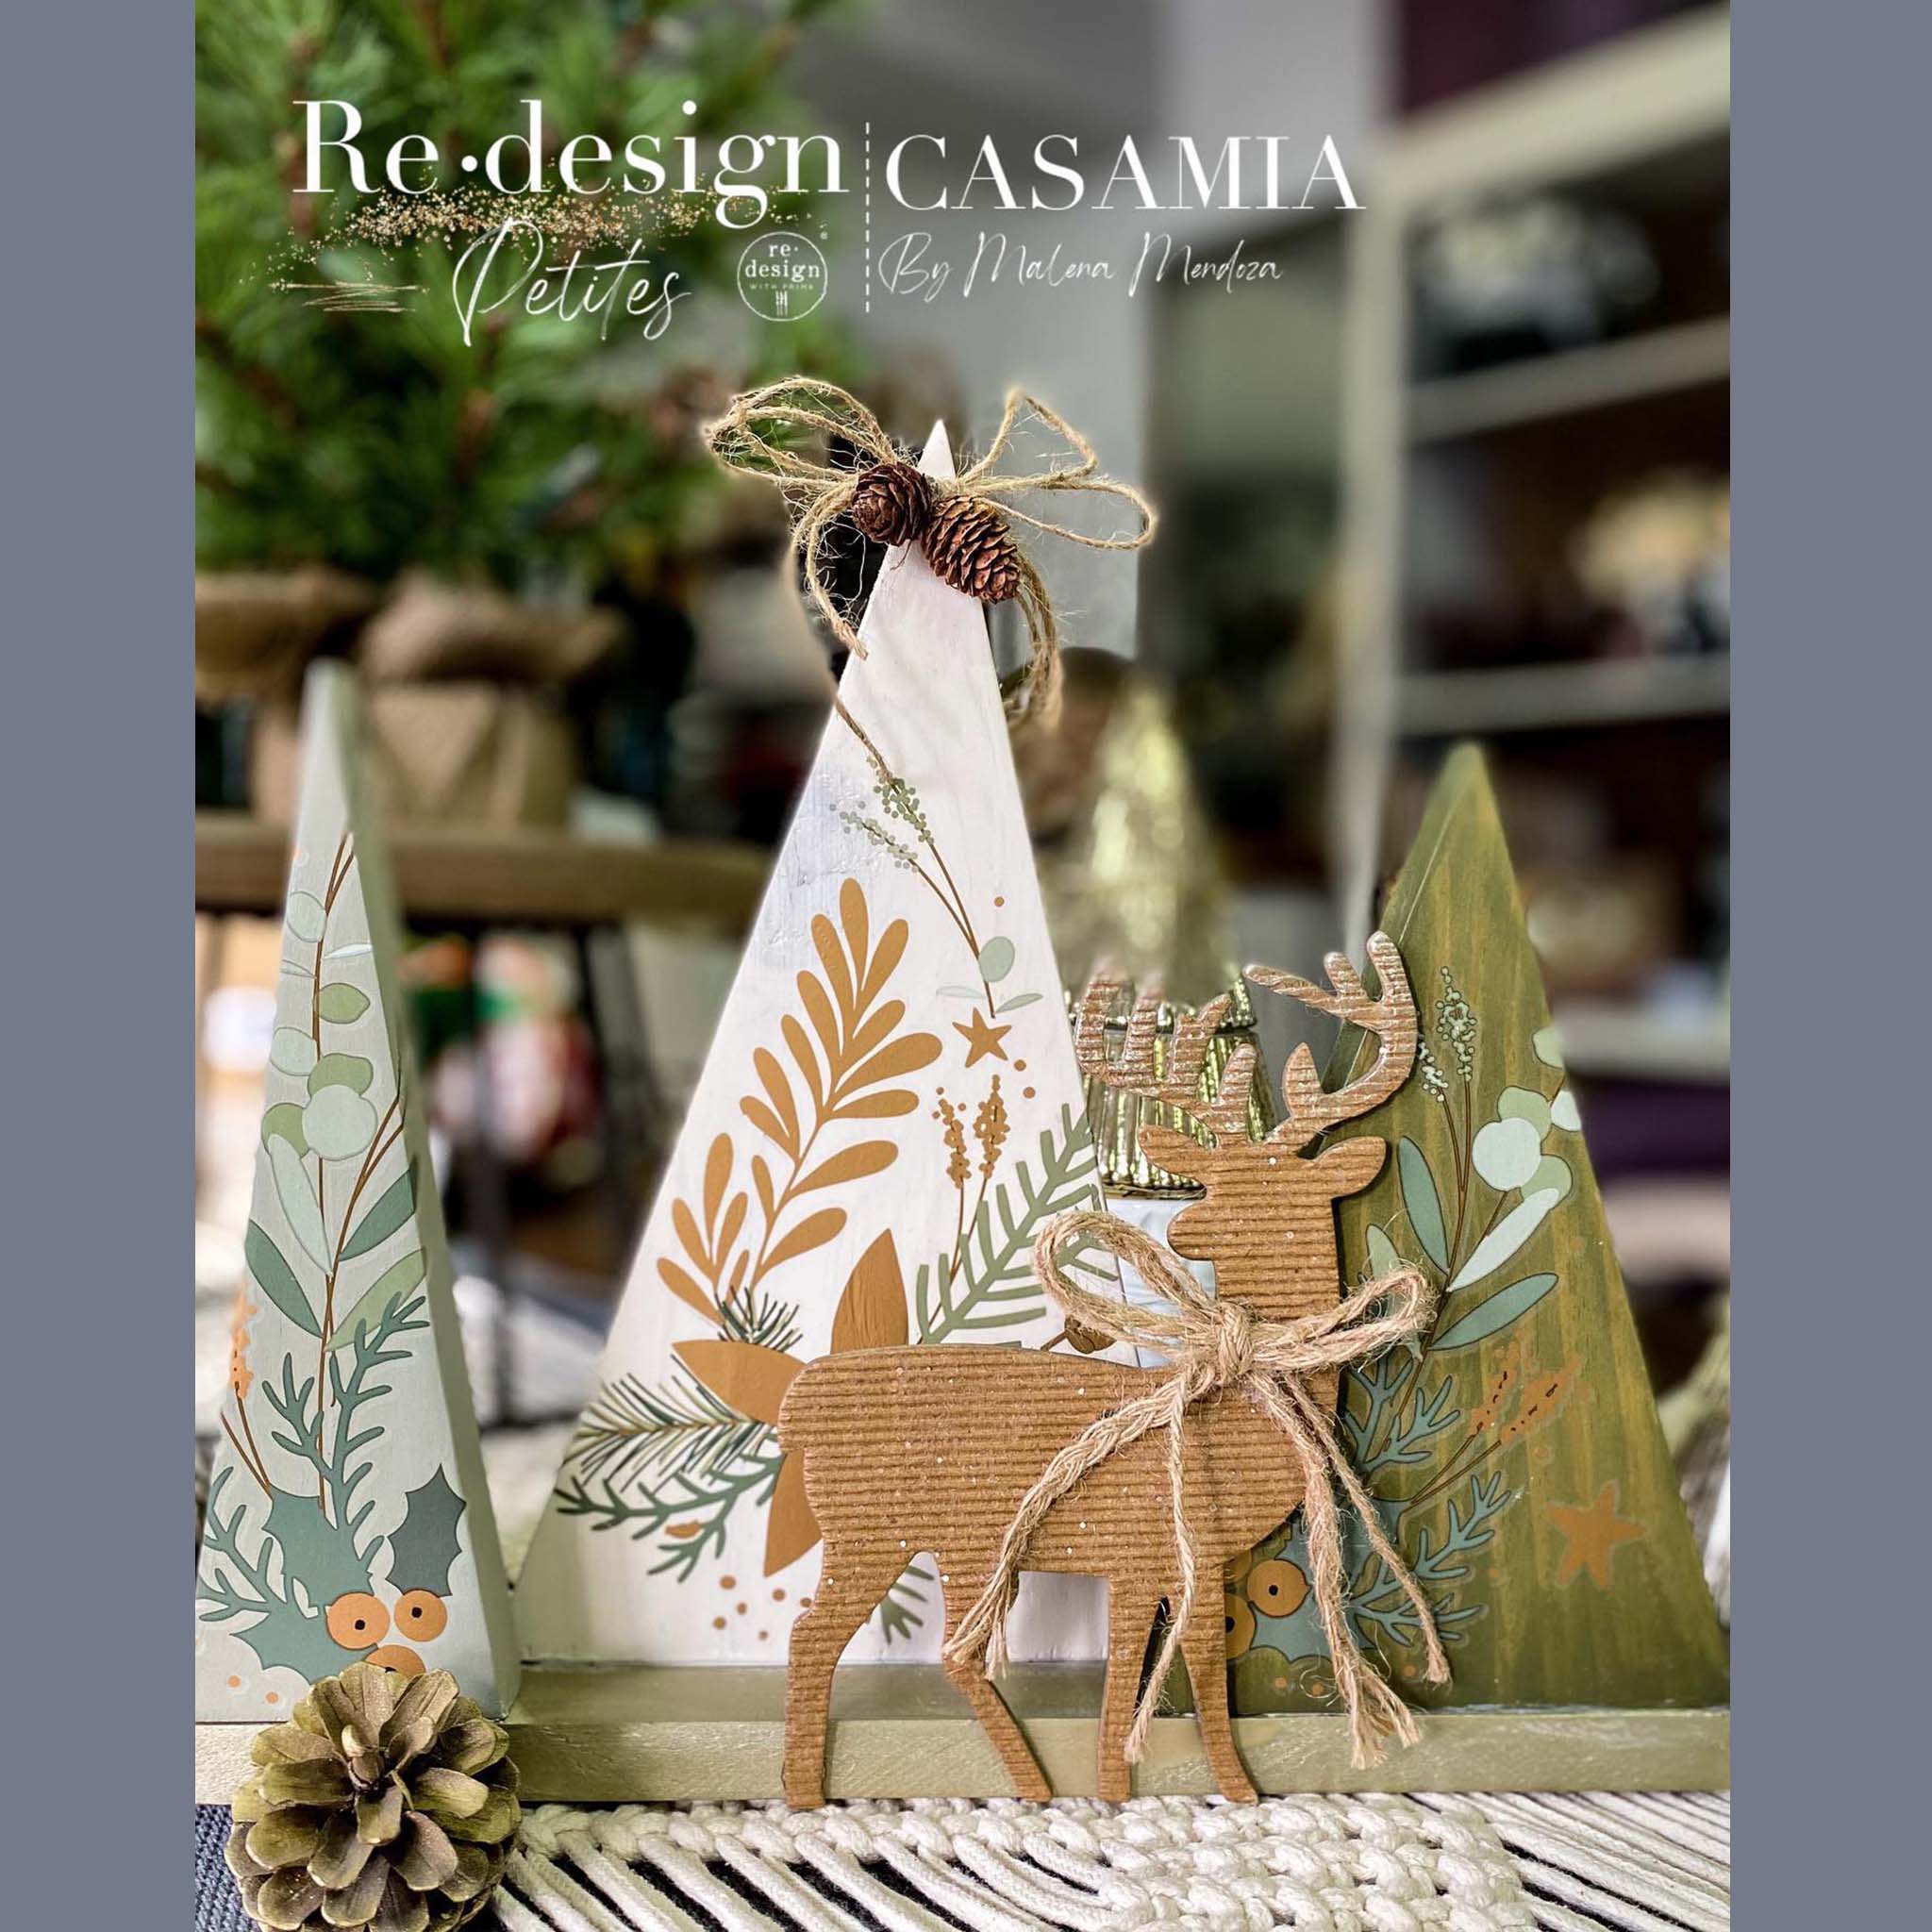 Small Christmas tree wood crafts created by Casamia by Melena Mendoza feature ReDesign with Prima's Holiday Spirit small transfer on them.